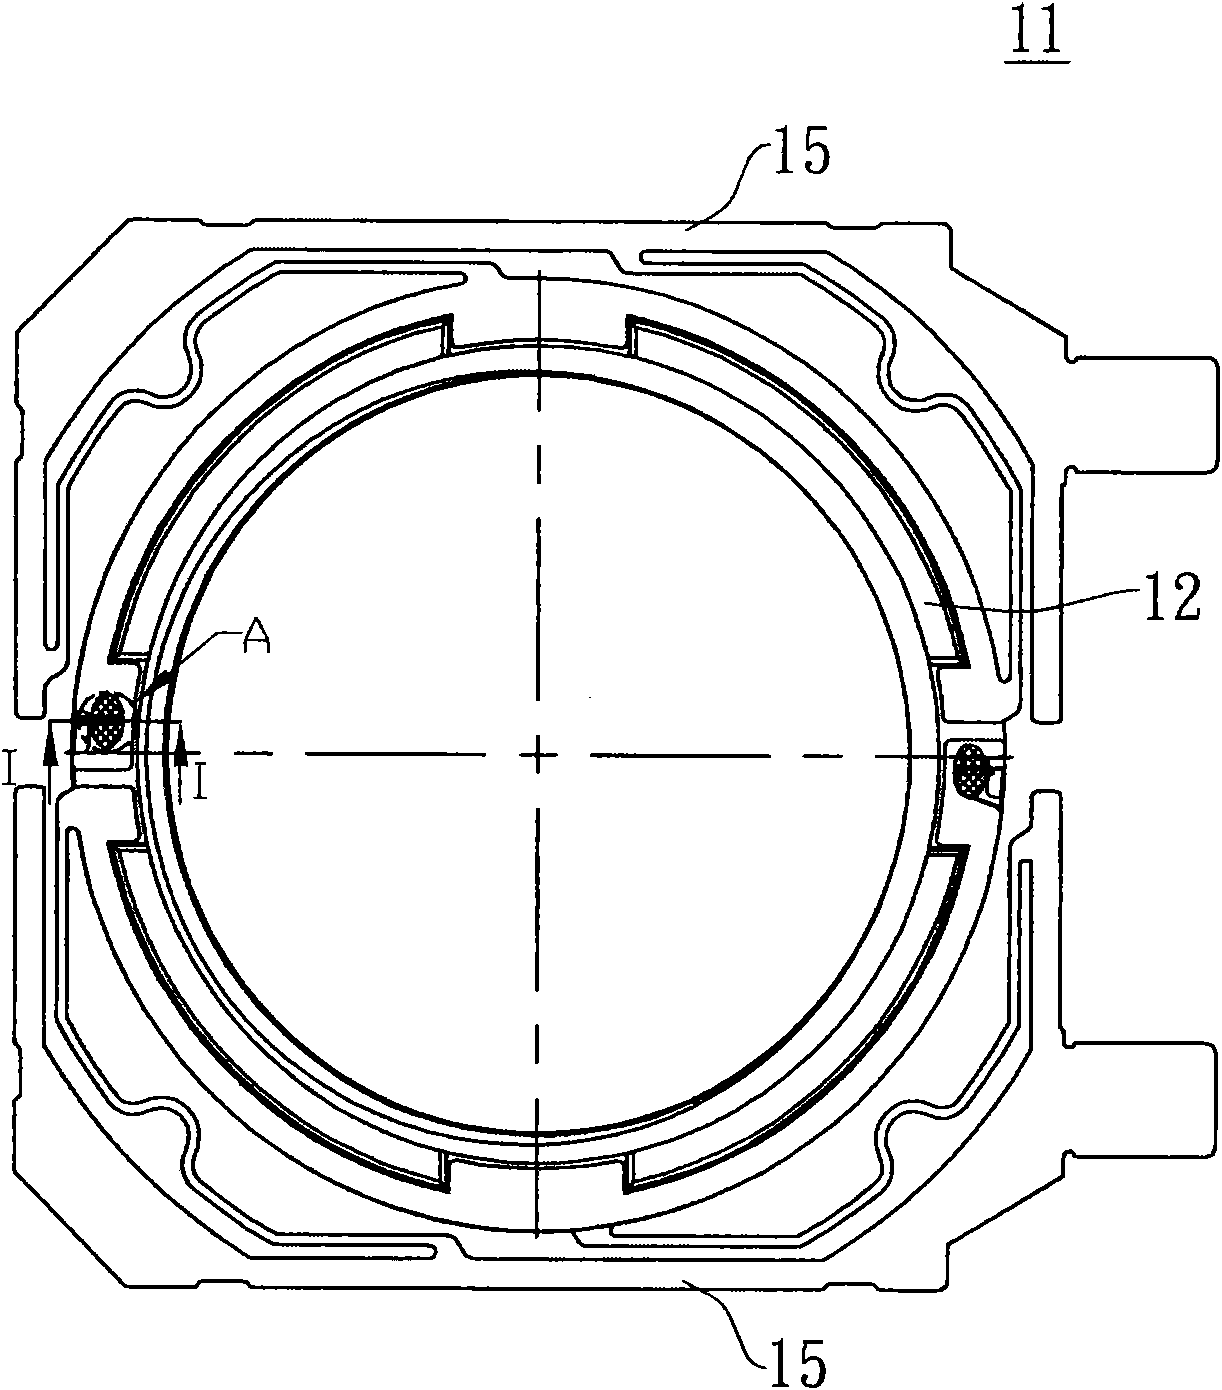 Driver for automatic focusing lens